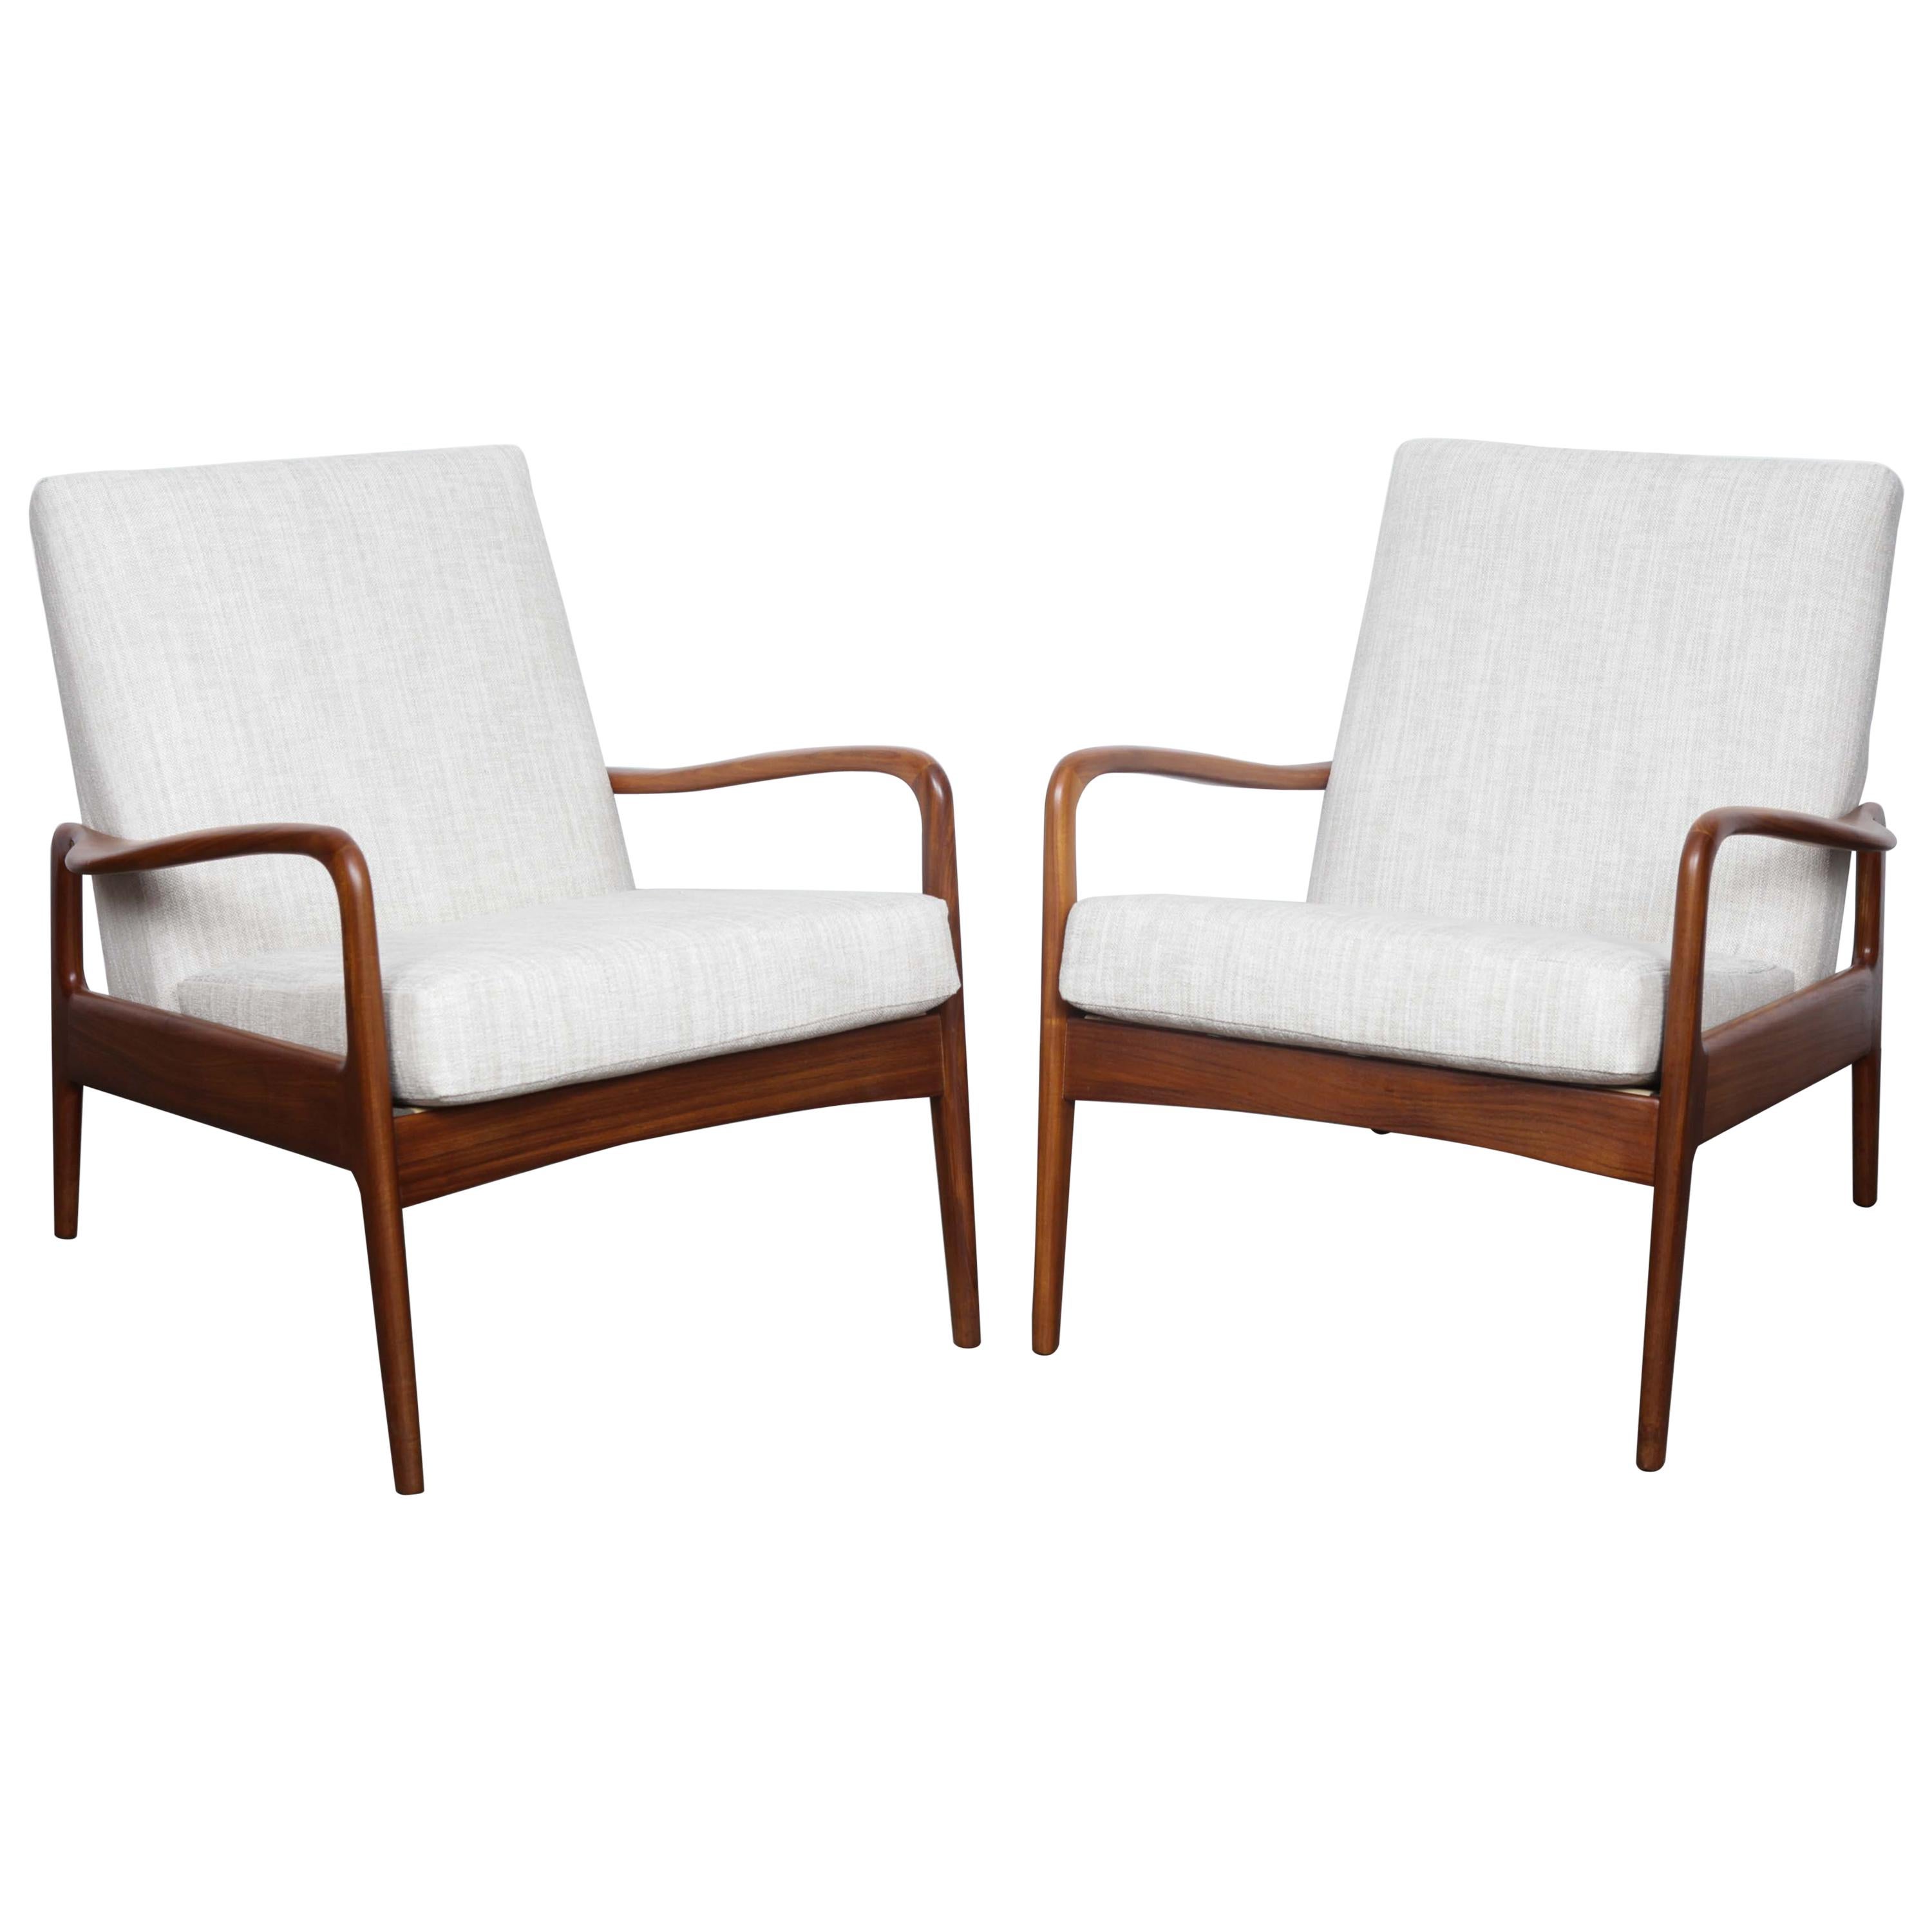 Pair of Solid Afromoisa Teak Lounge Chairs by Greaves and Thomas, England